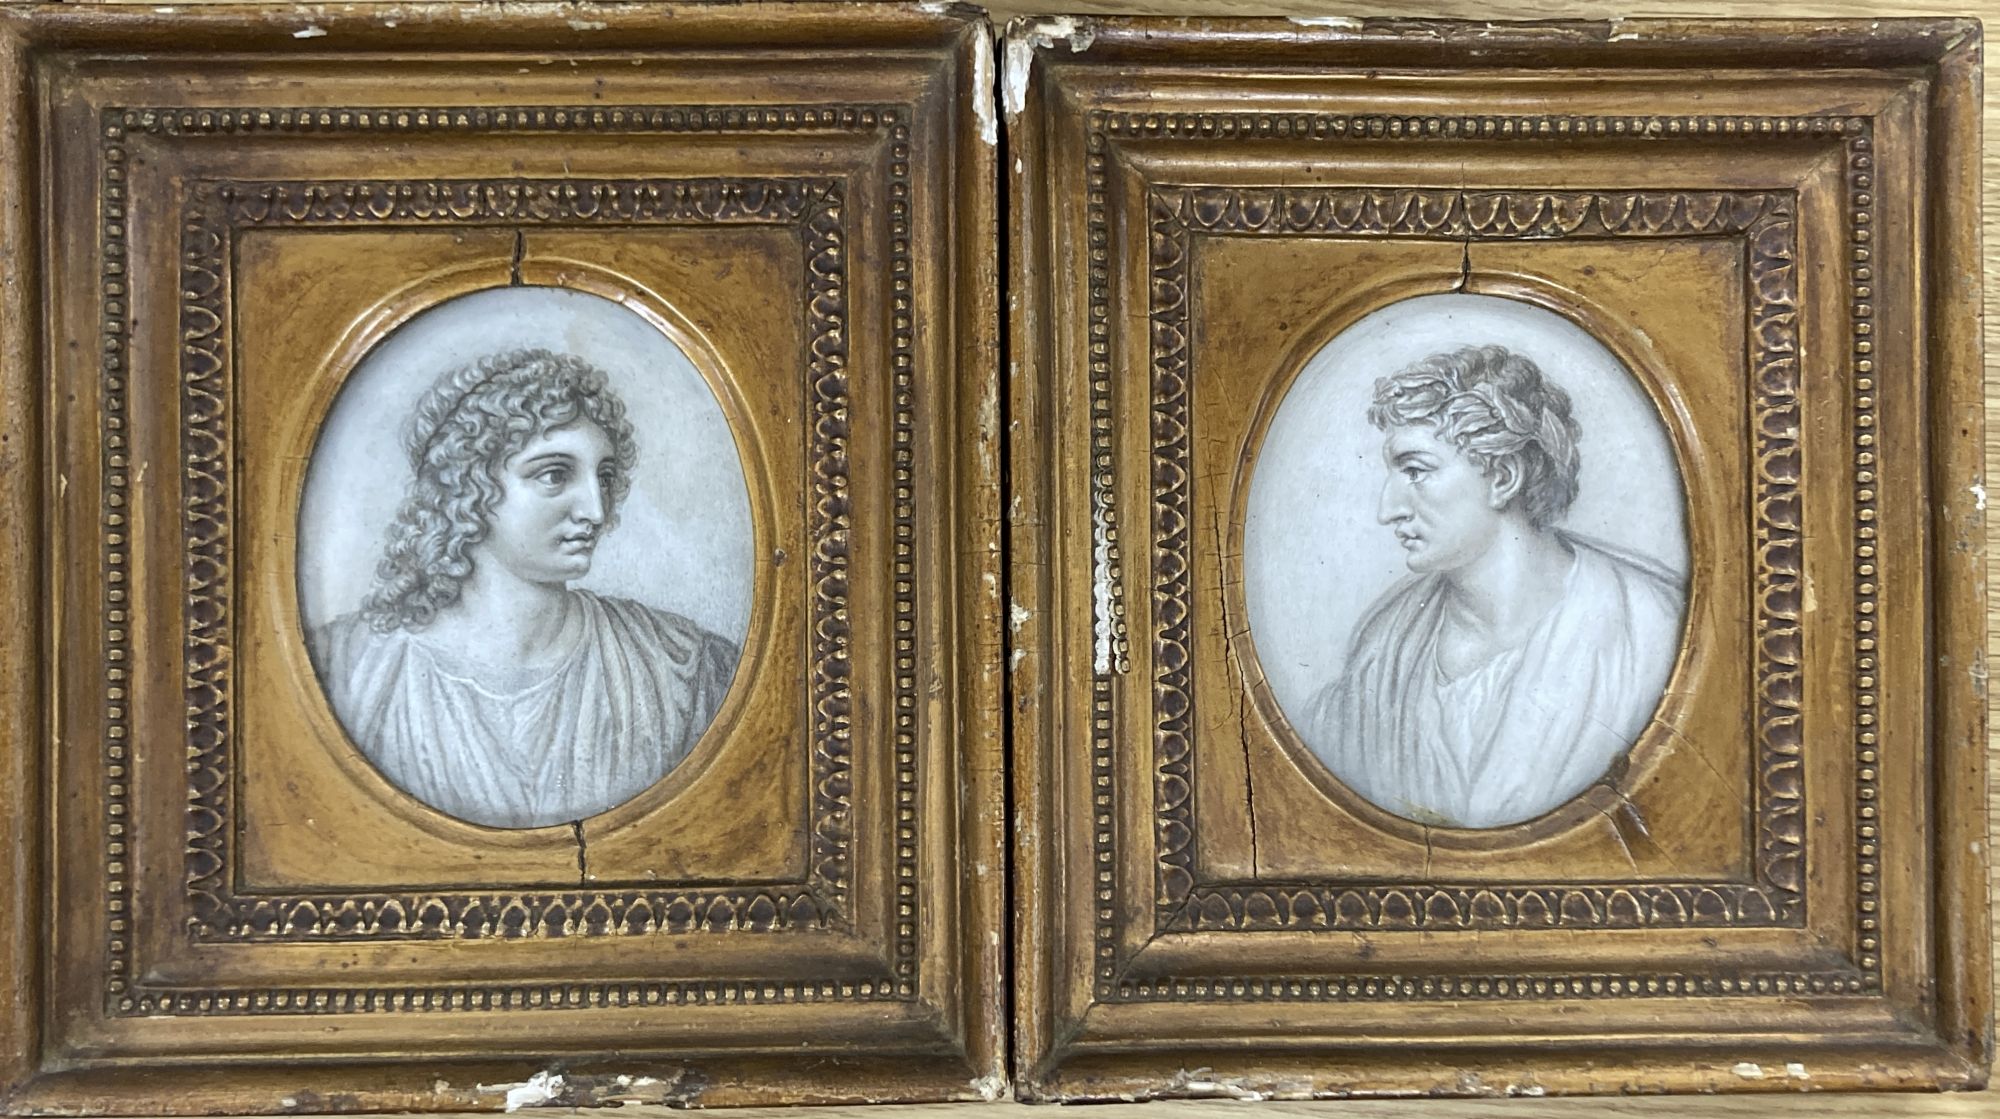 Late 18th century English School, pair of monochrome watercolours, Heads of Horace and Virgil, 11 x 9cm